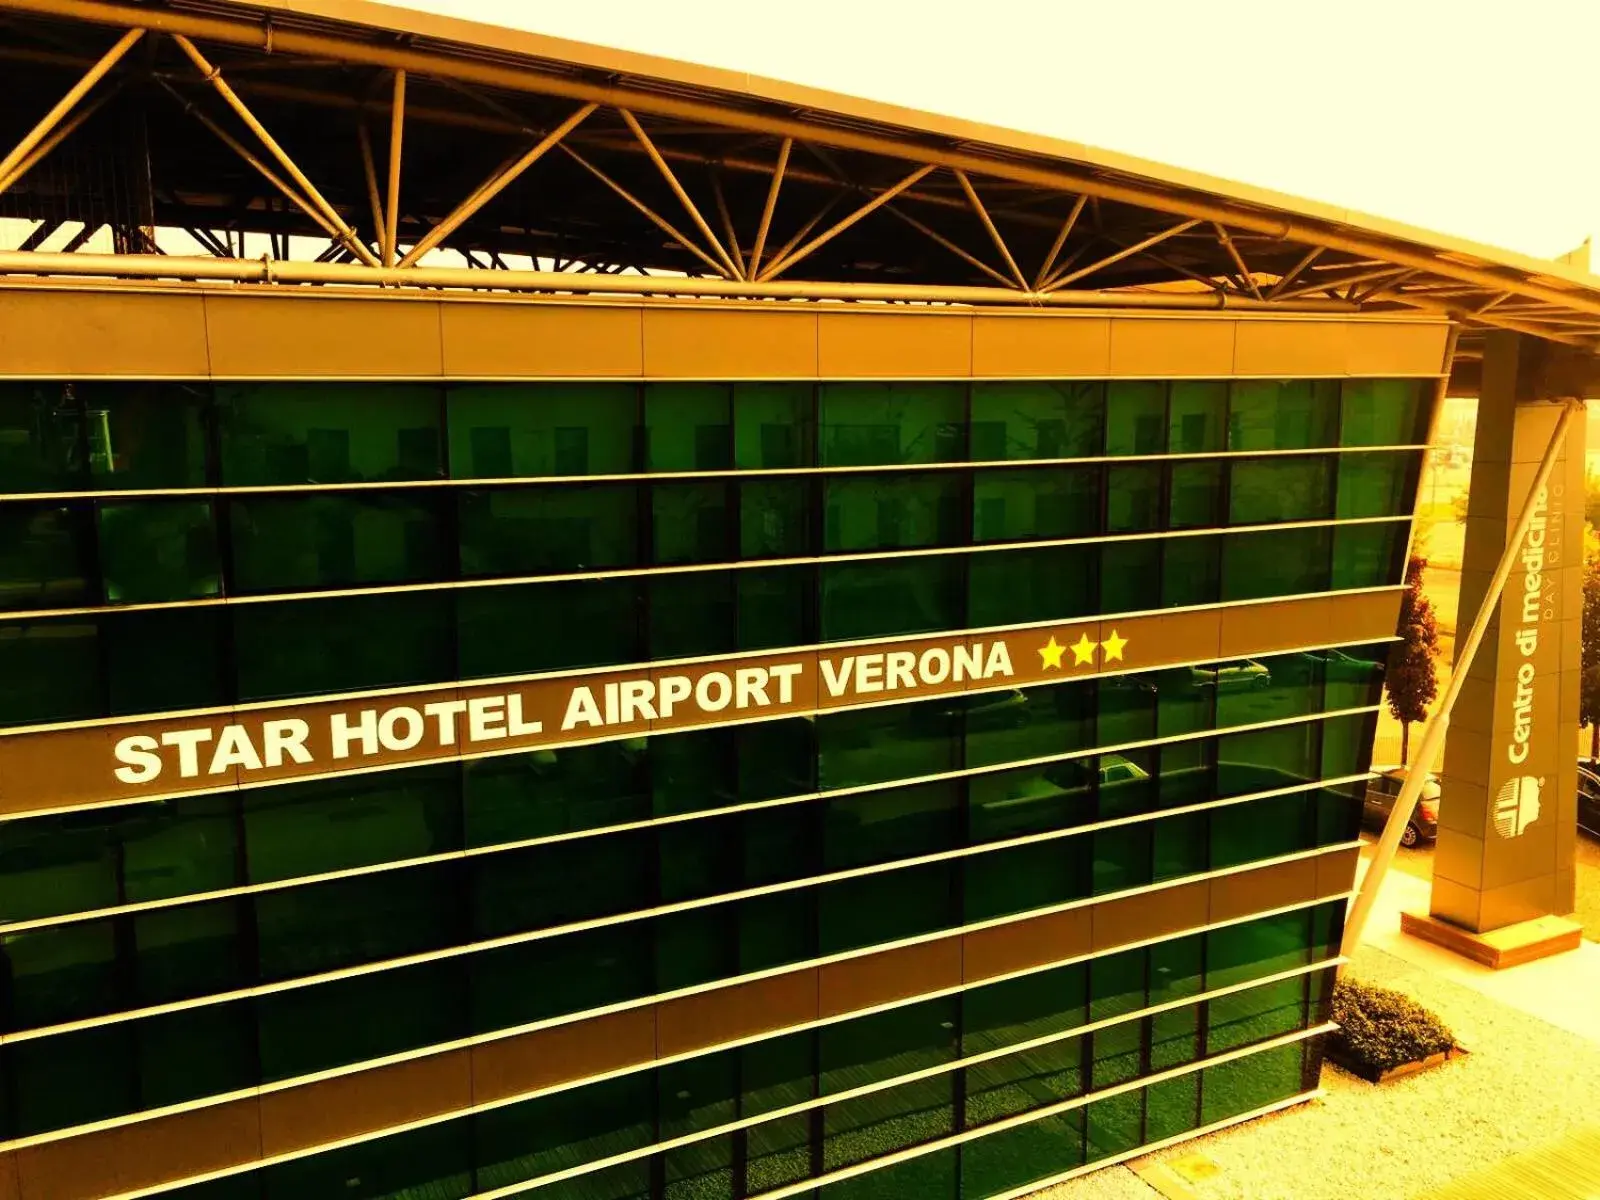 Property logo or sign in Star Hotel Airport Verona